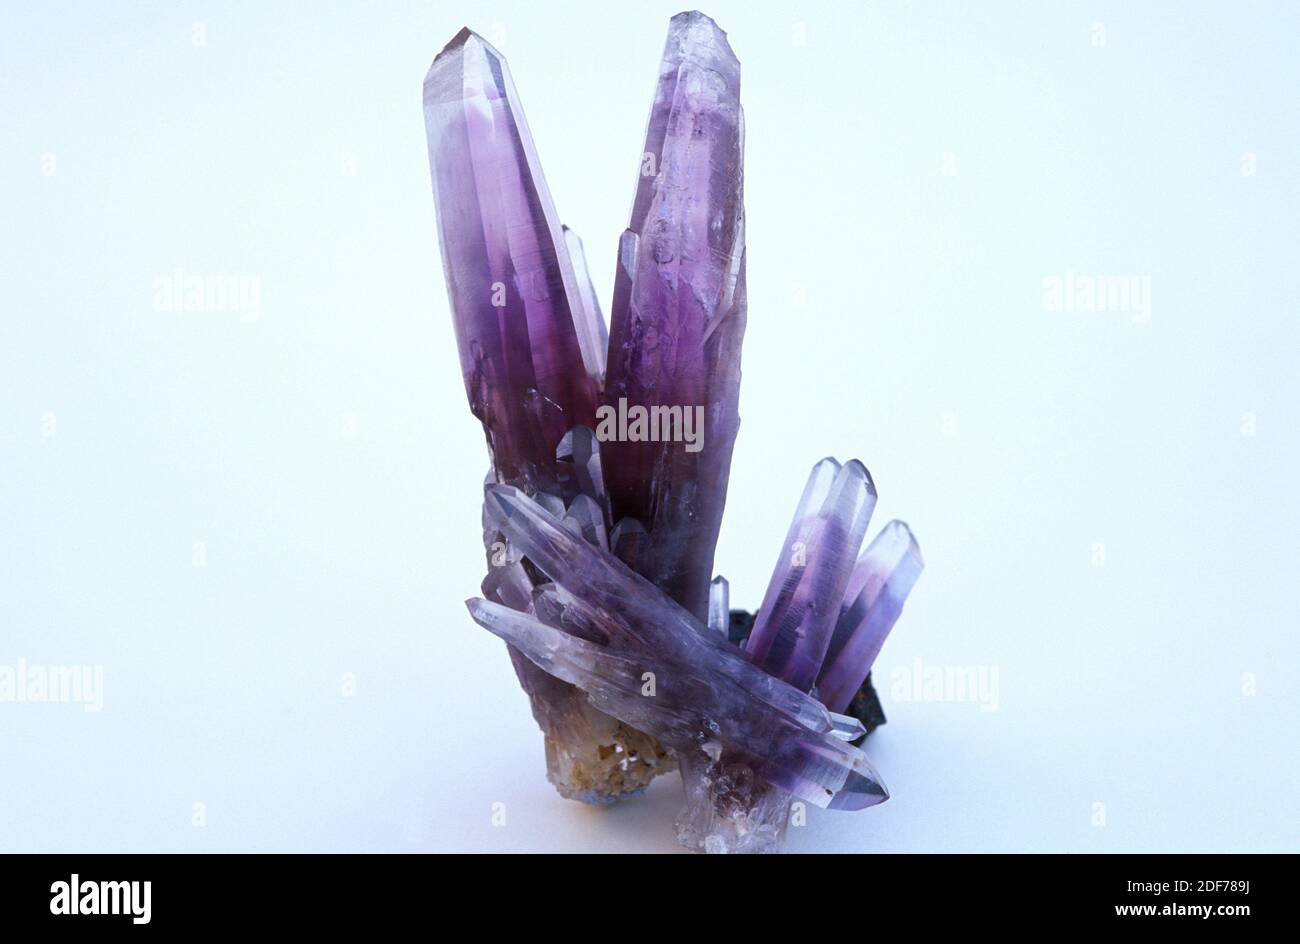 Amethyst crystals. Amethyst is a violete quartz variety, violet or purple color is due to iron presence. Stock Photo